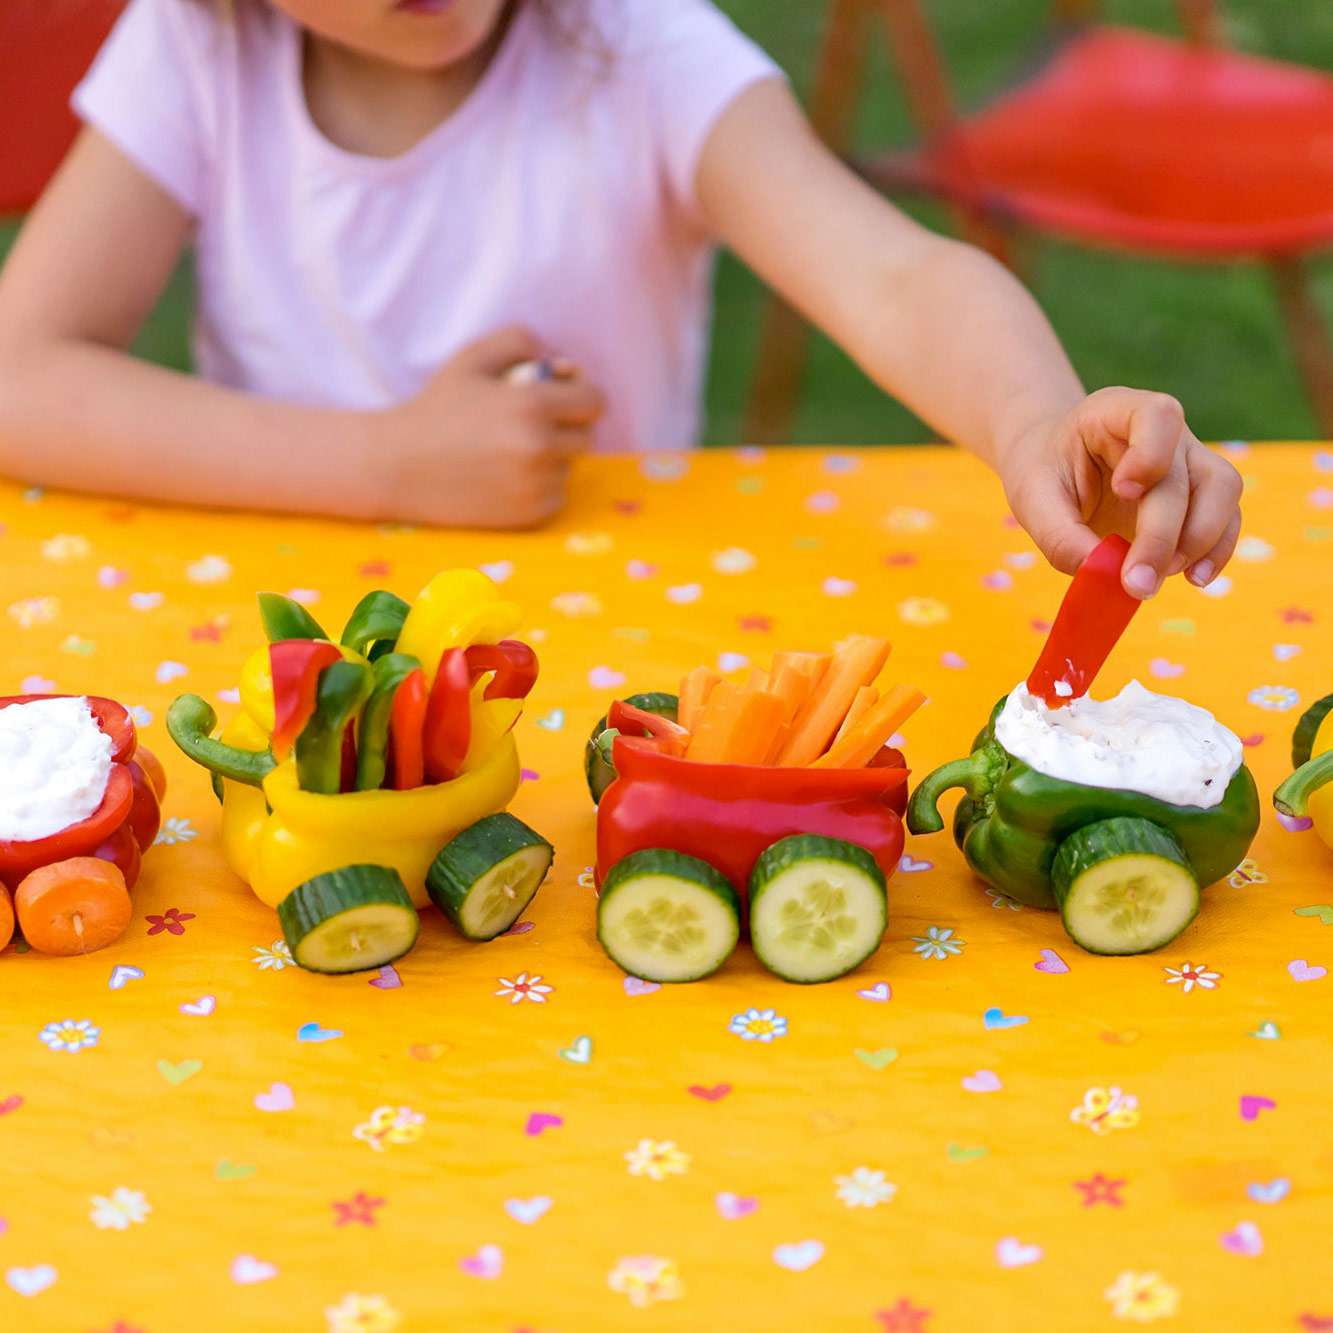 Healthy Kids Party Food Ideas to Curb the Sugar Rush